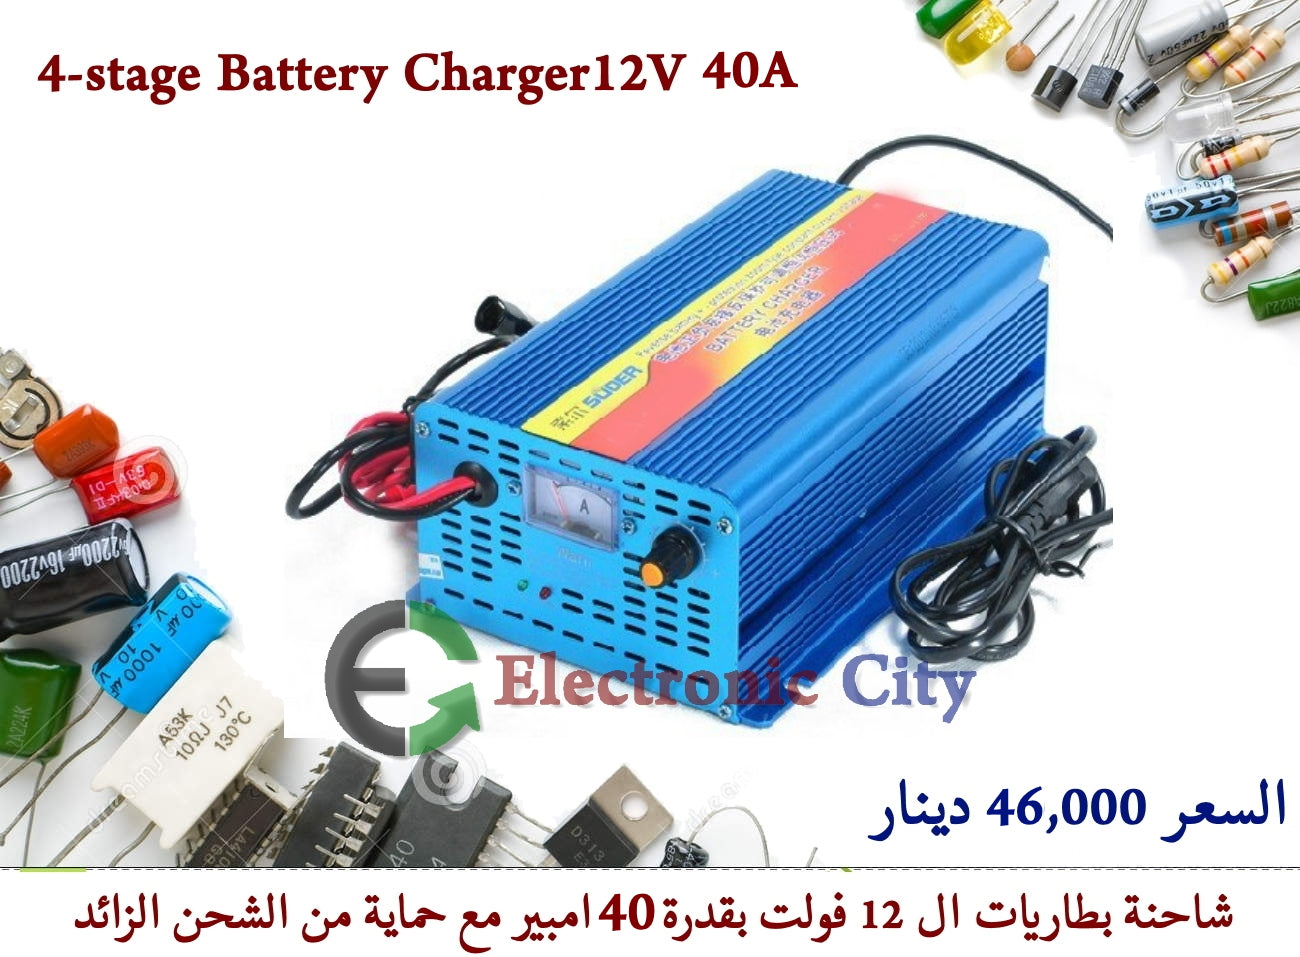 4-stage battery charger 12V 40A